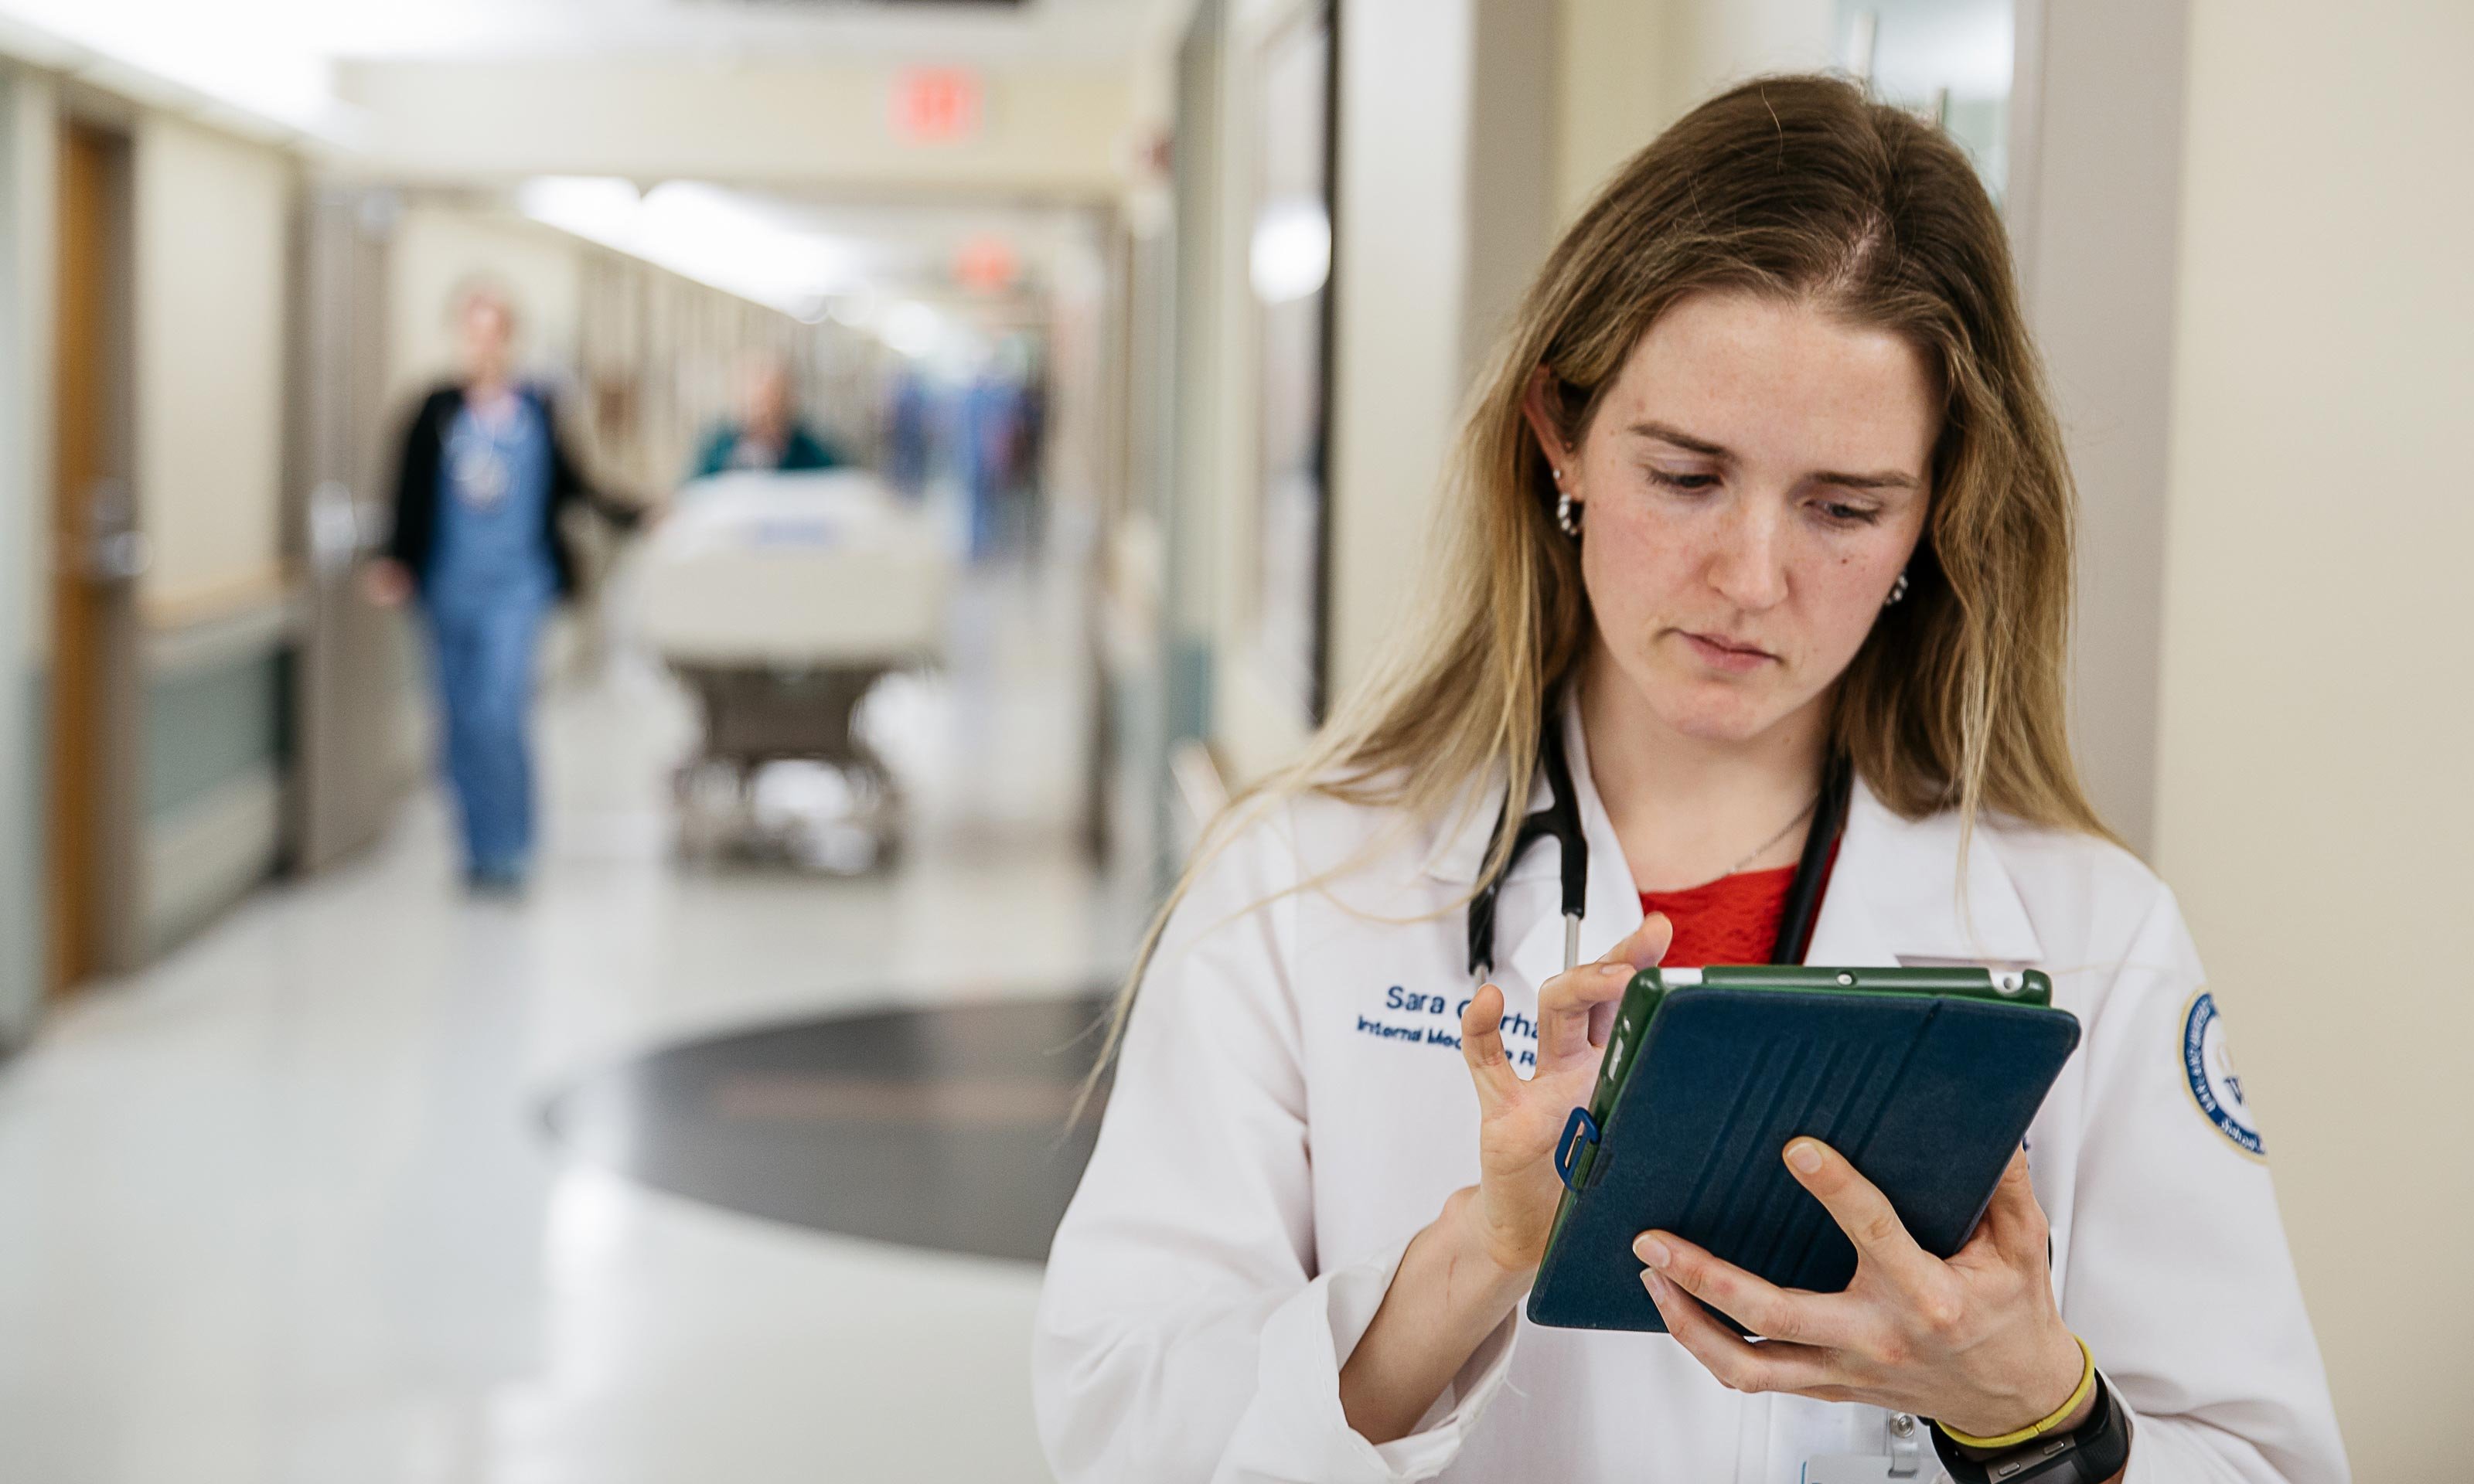 O U W B graduate Dr. Sara Gerhardt serving her residency at Beaumont Hospital in Royal Oak, Michigan. Standing in the hospital hallway, looking at an i pad, wearing a white coat.